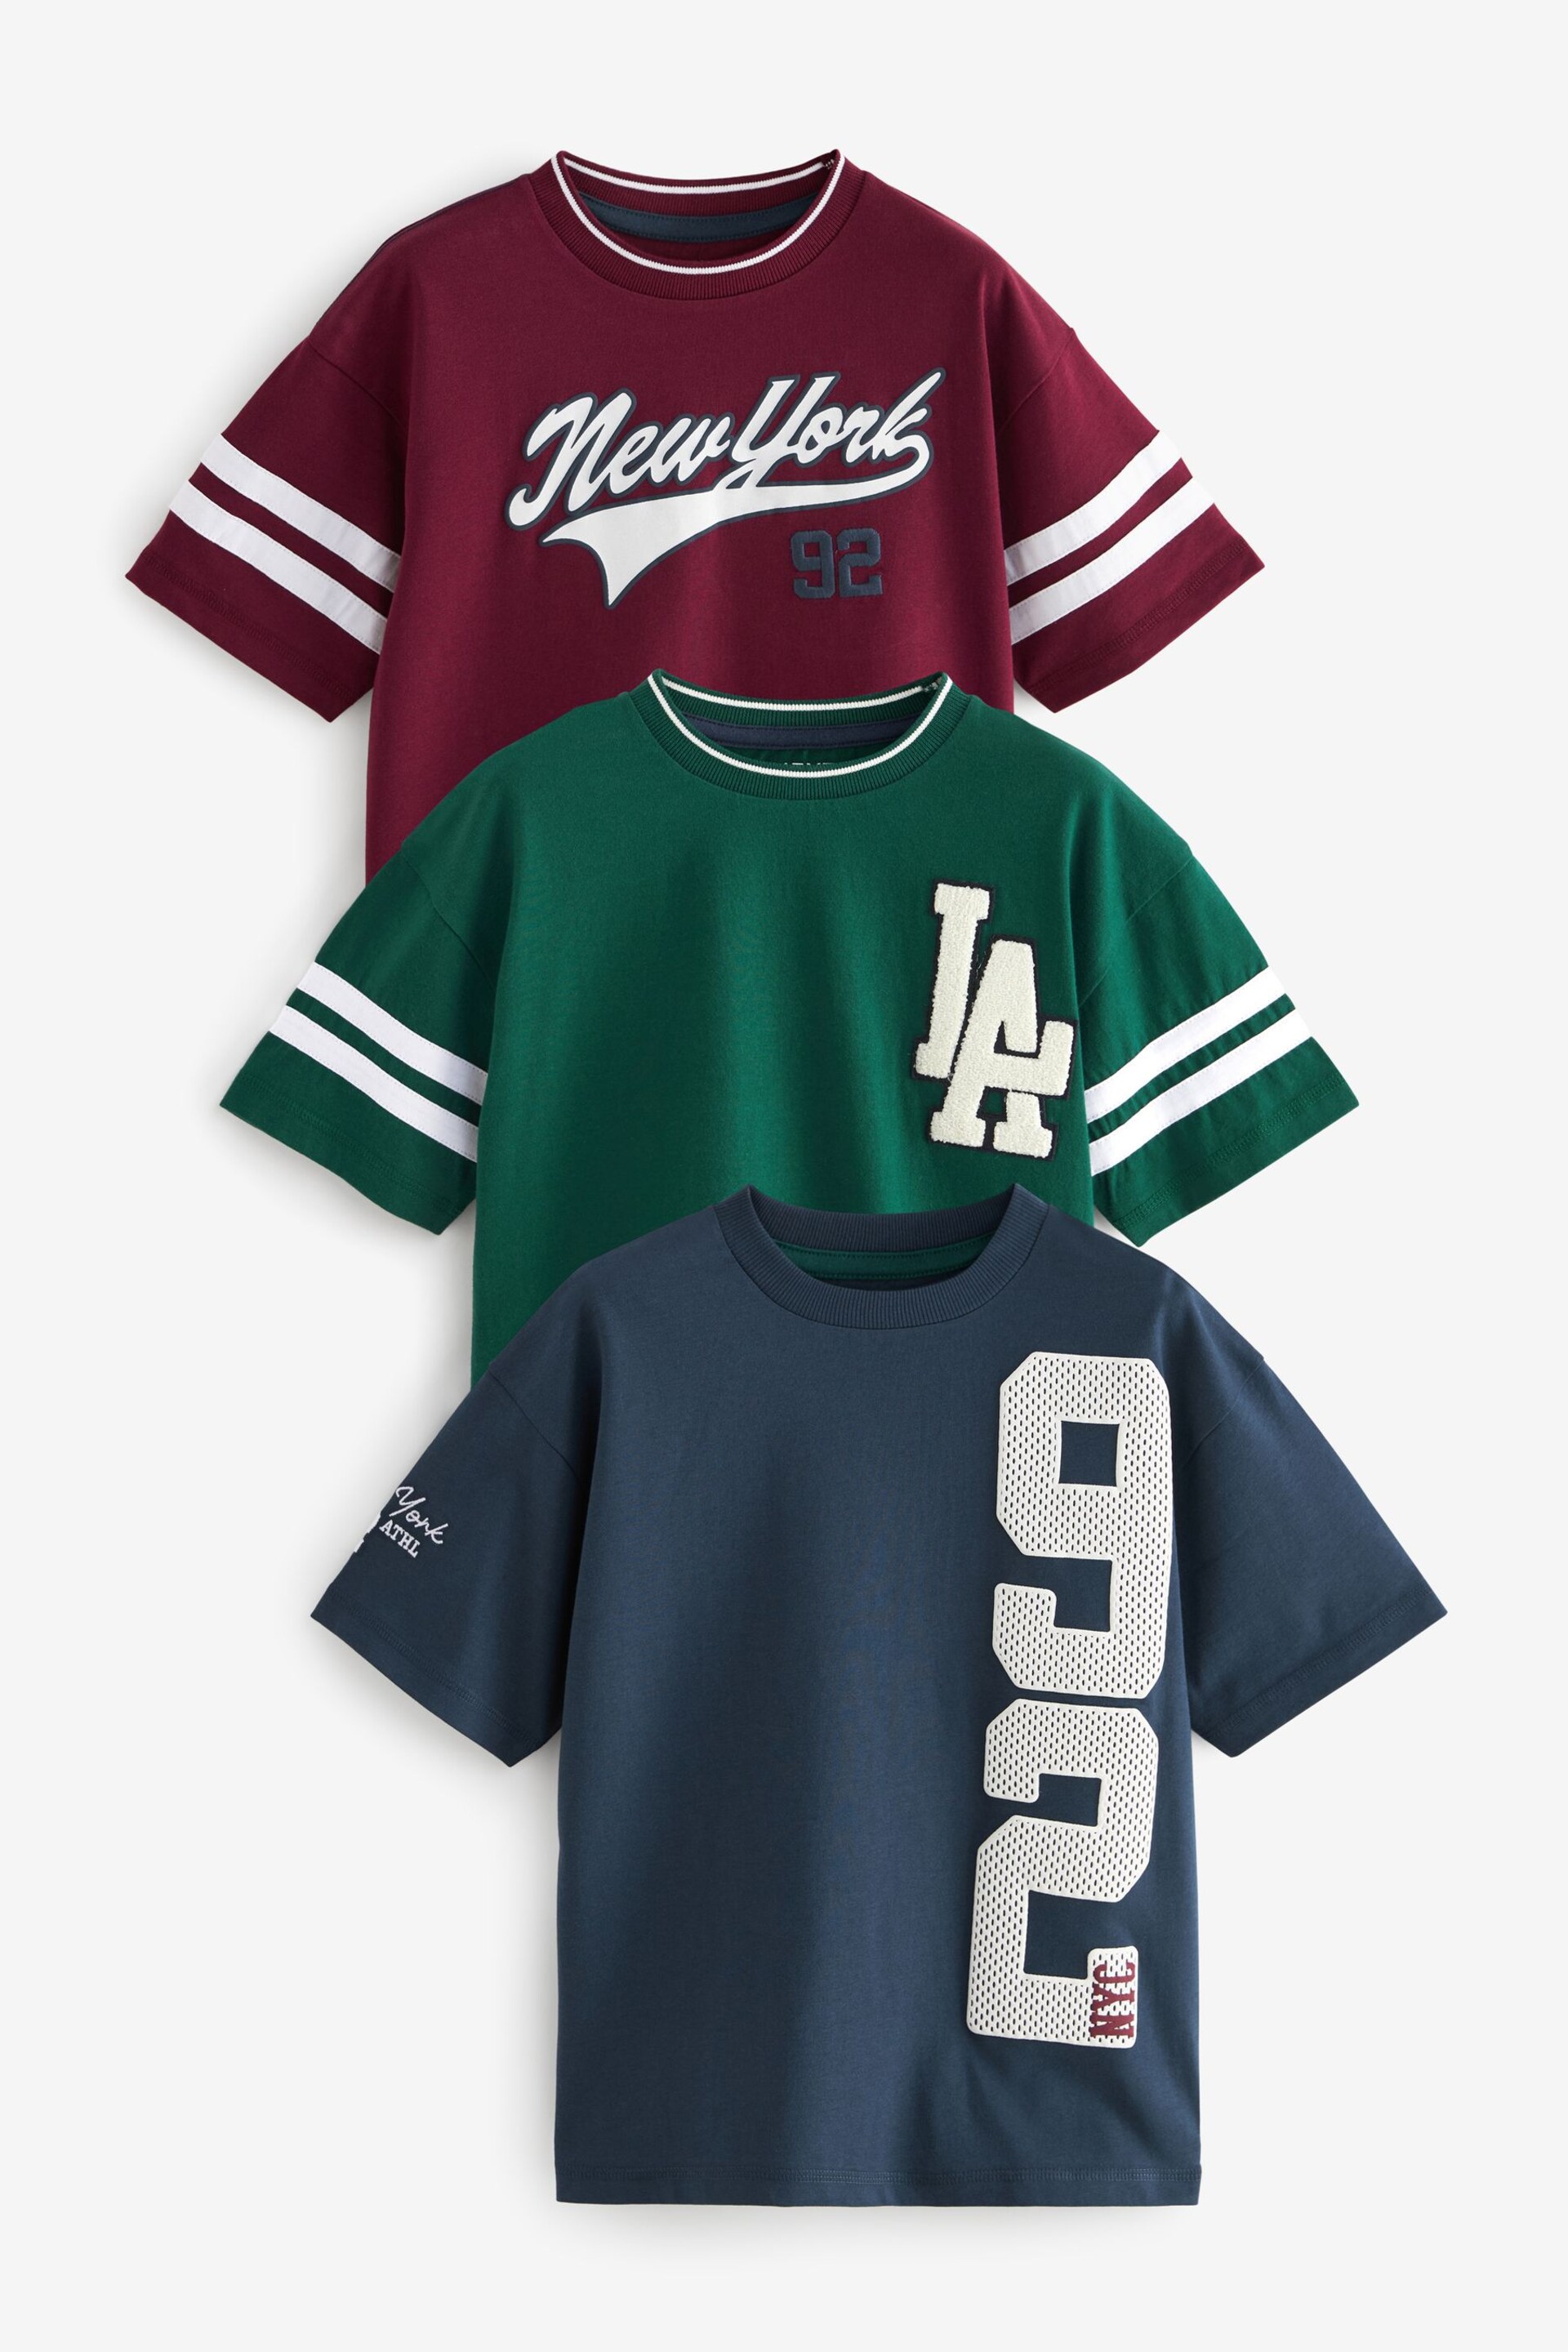 Berry/Navy/Green Varsity Graphic T-Shirts 3 Pack (3-16yrs) - Image 1 of 6